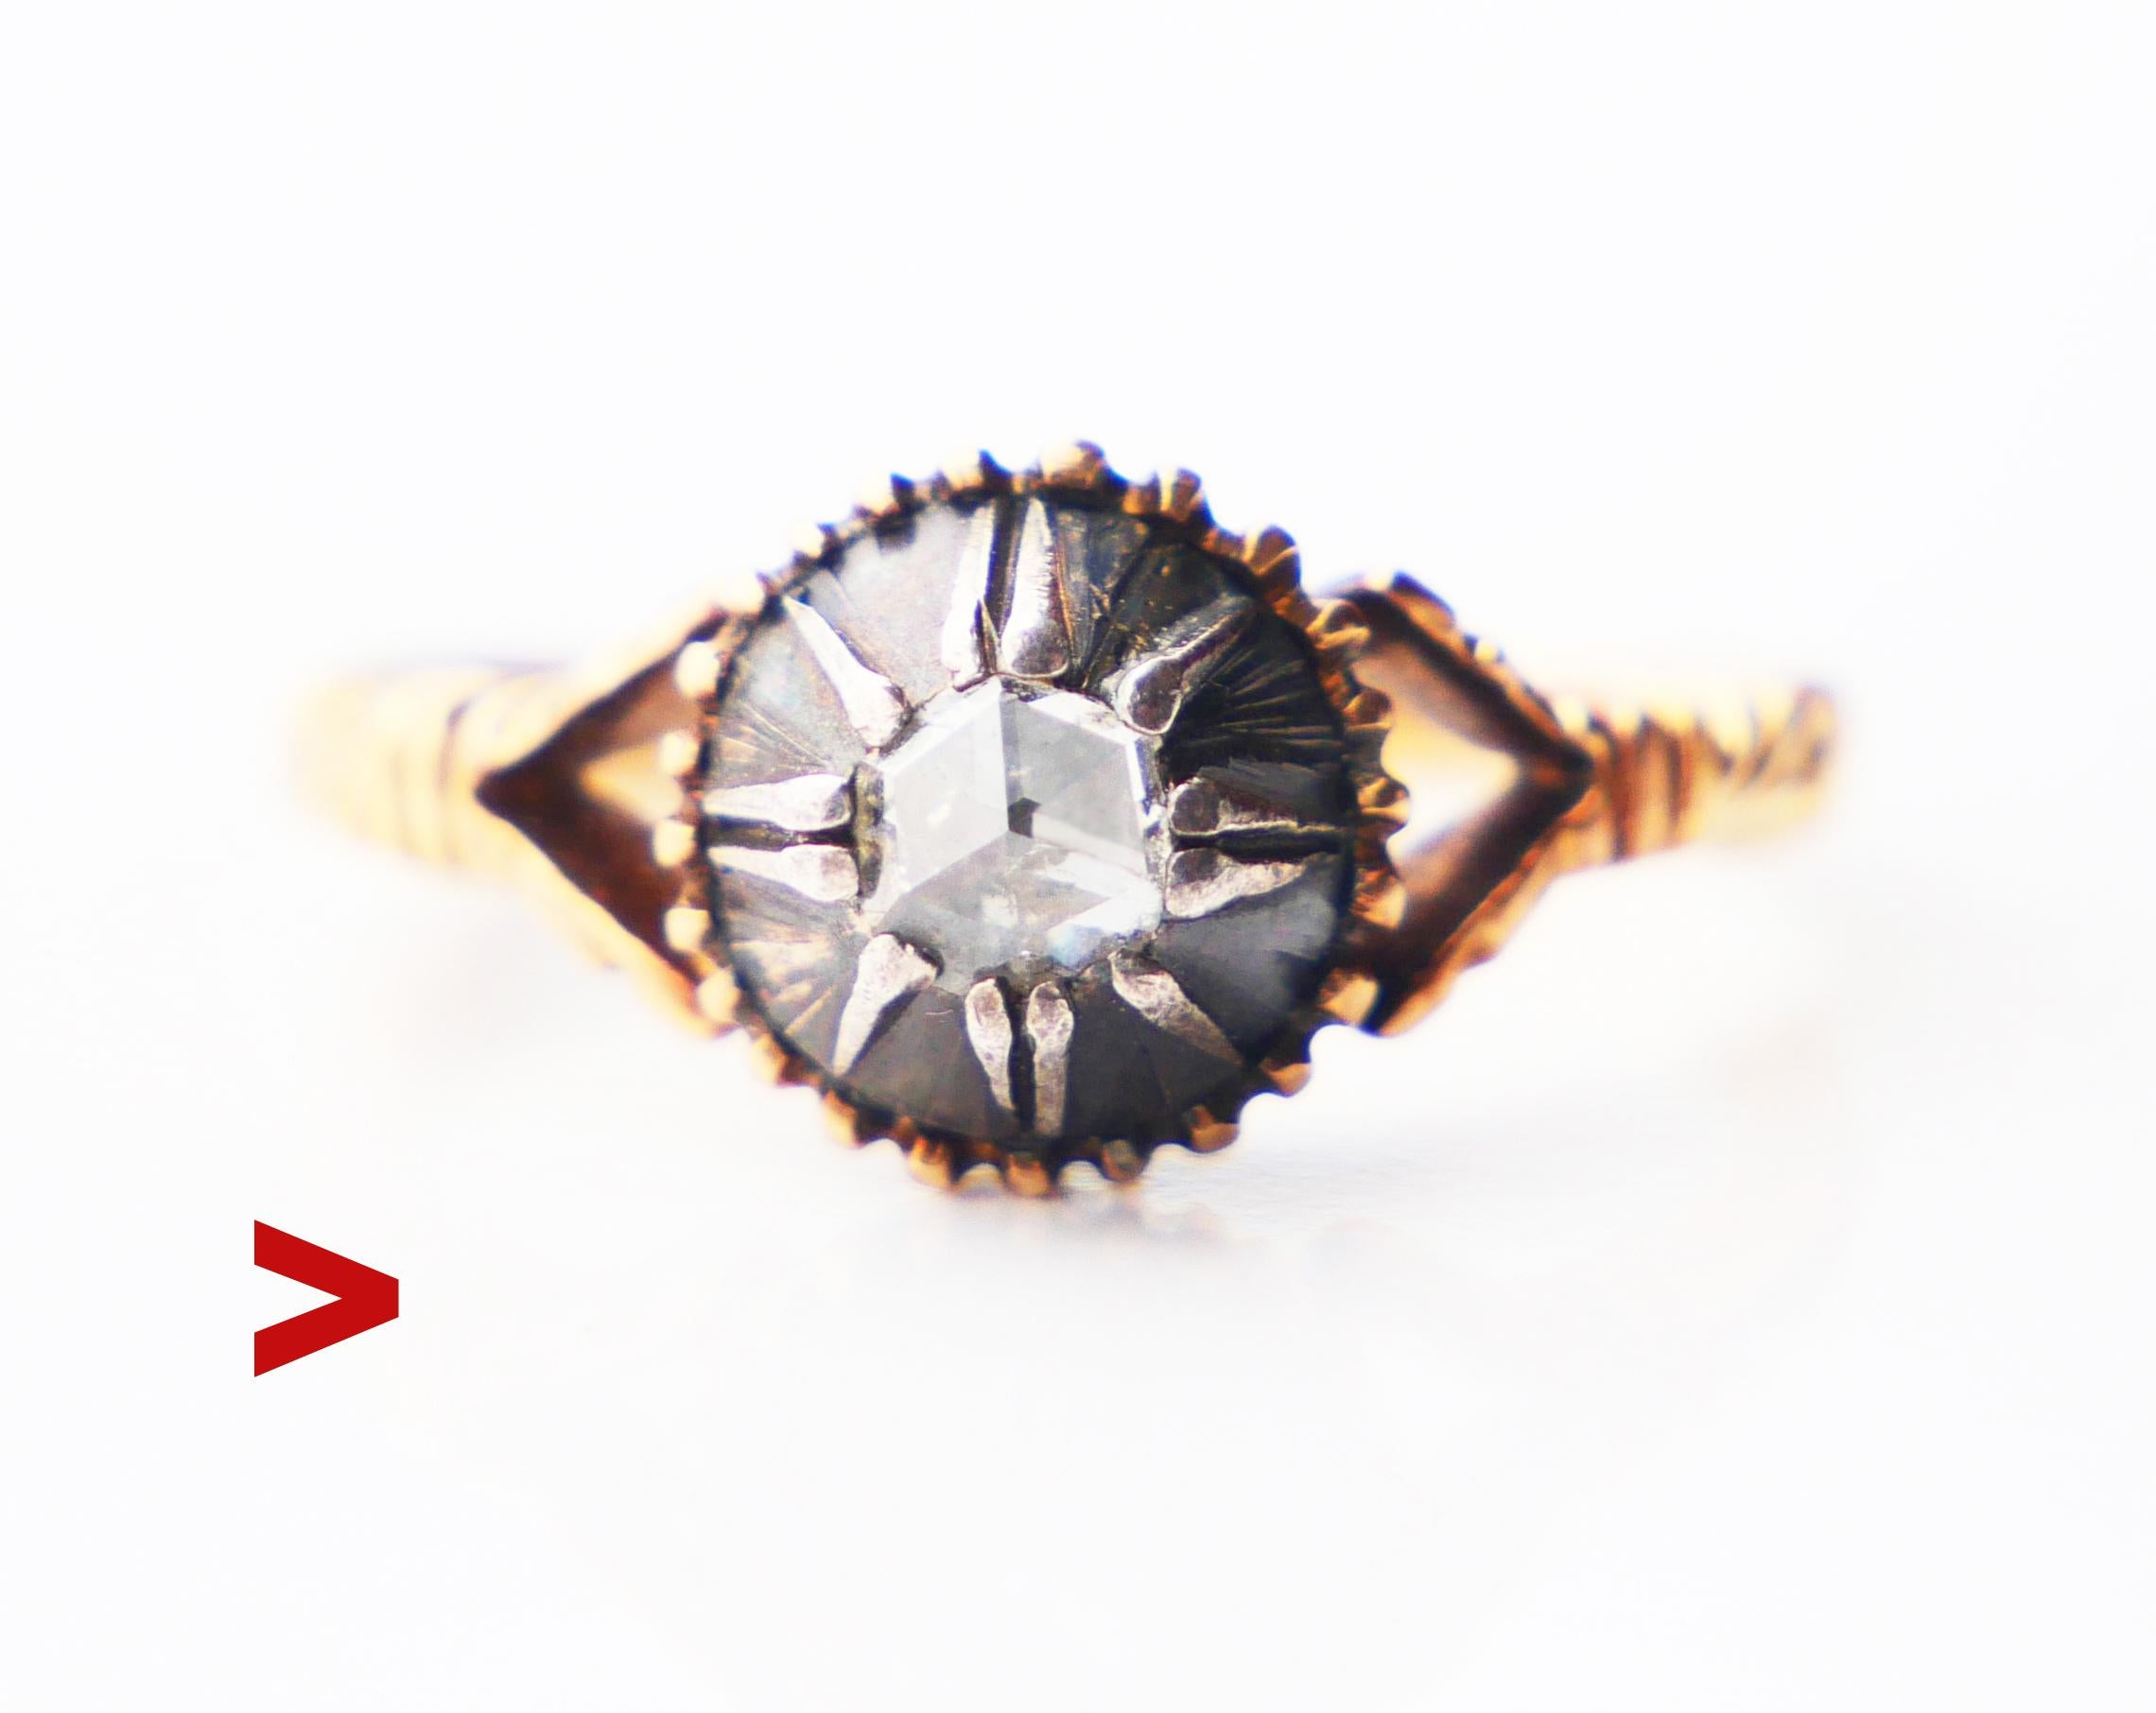 This Renaissance-styled ring is about a combination of Gold, Silver, and Diamond of some type of transitional cut that creates a lot of shiny reflections on its triangular facets. The Diamond is white, measures Ø 4 mm / ca. 0.3 ct with the back side